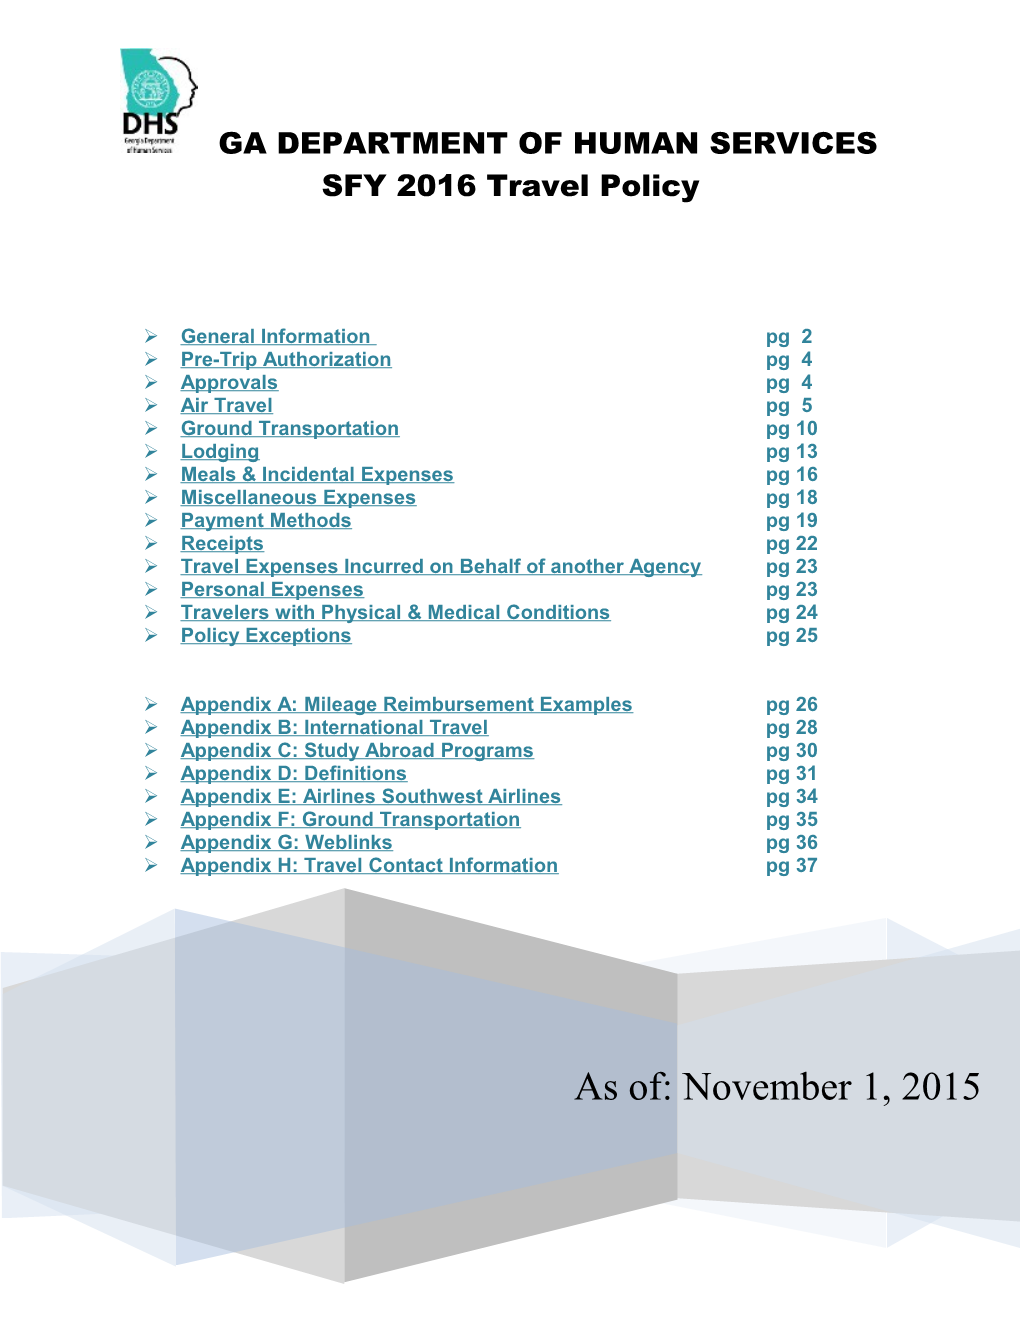 SFY 2016 Travel Policy